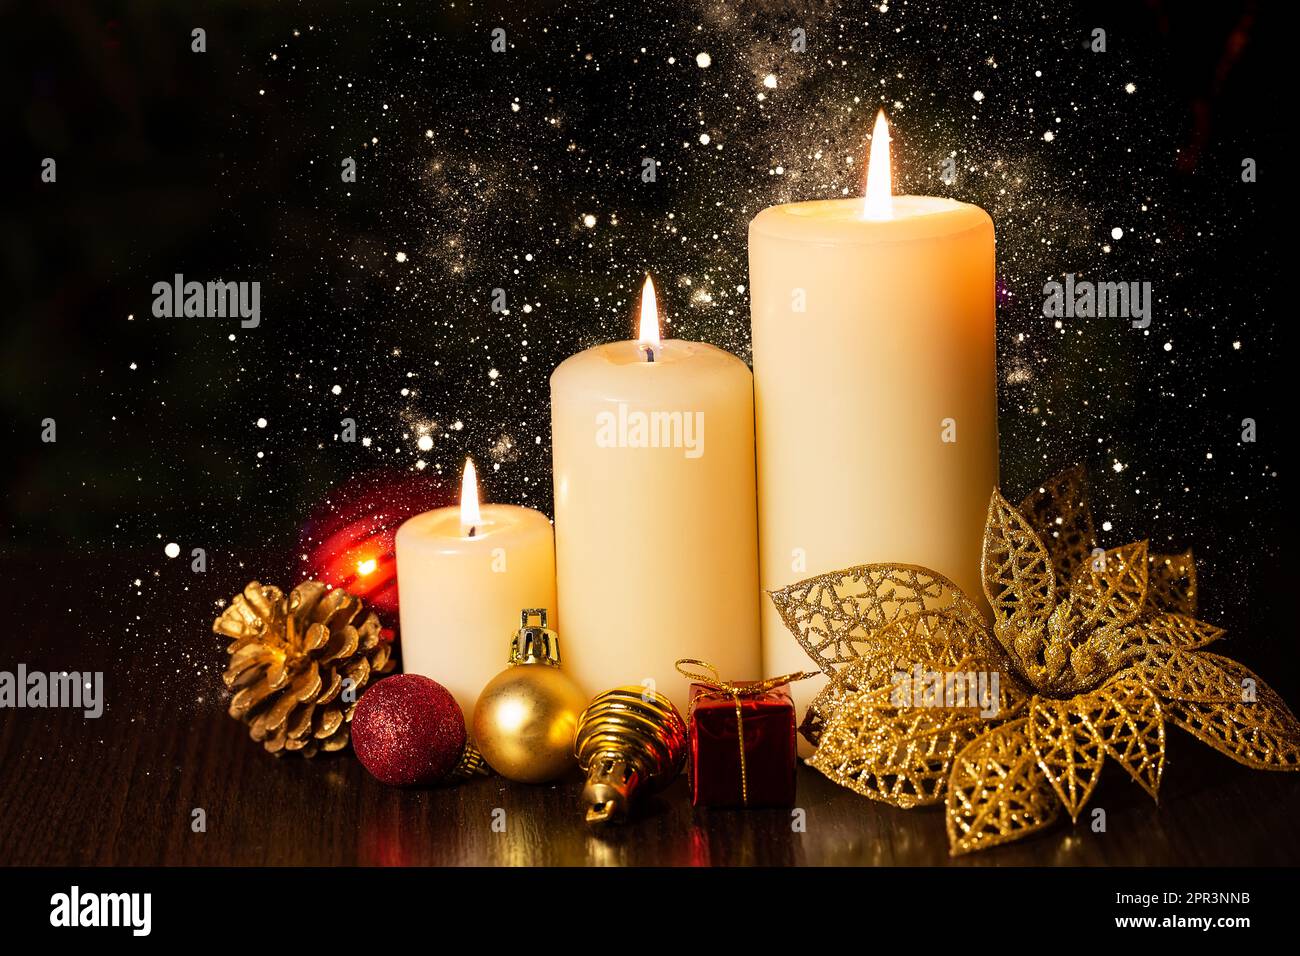 Christmas holiday card with  three burning candles and ornaments. Christmas decoration with candles over dark background with bokeh light. Christmas b Stock Photo